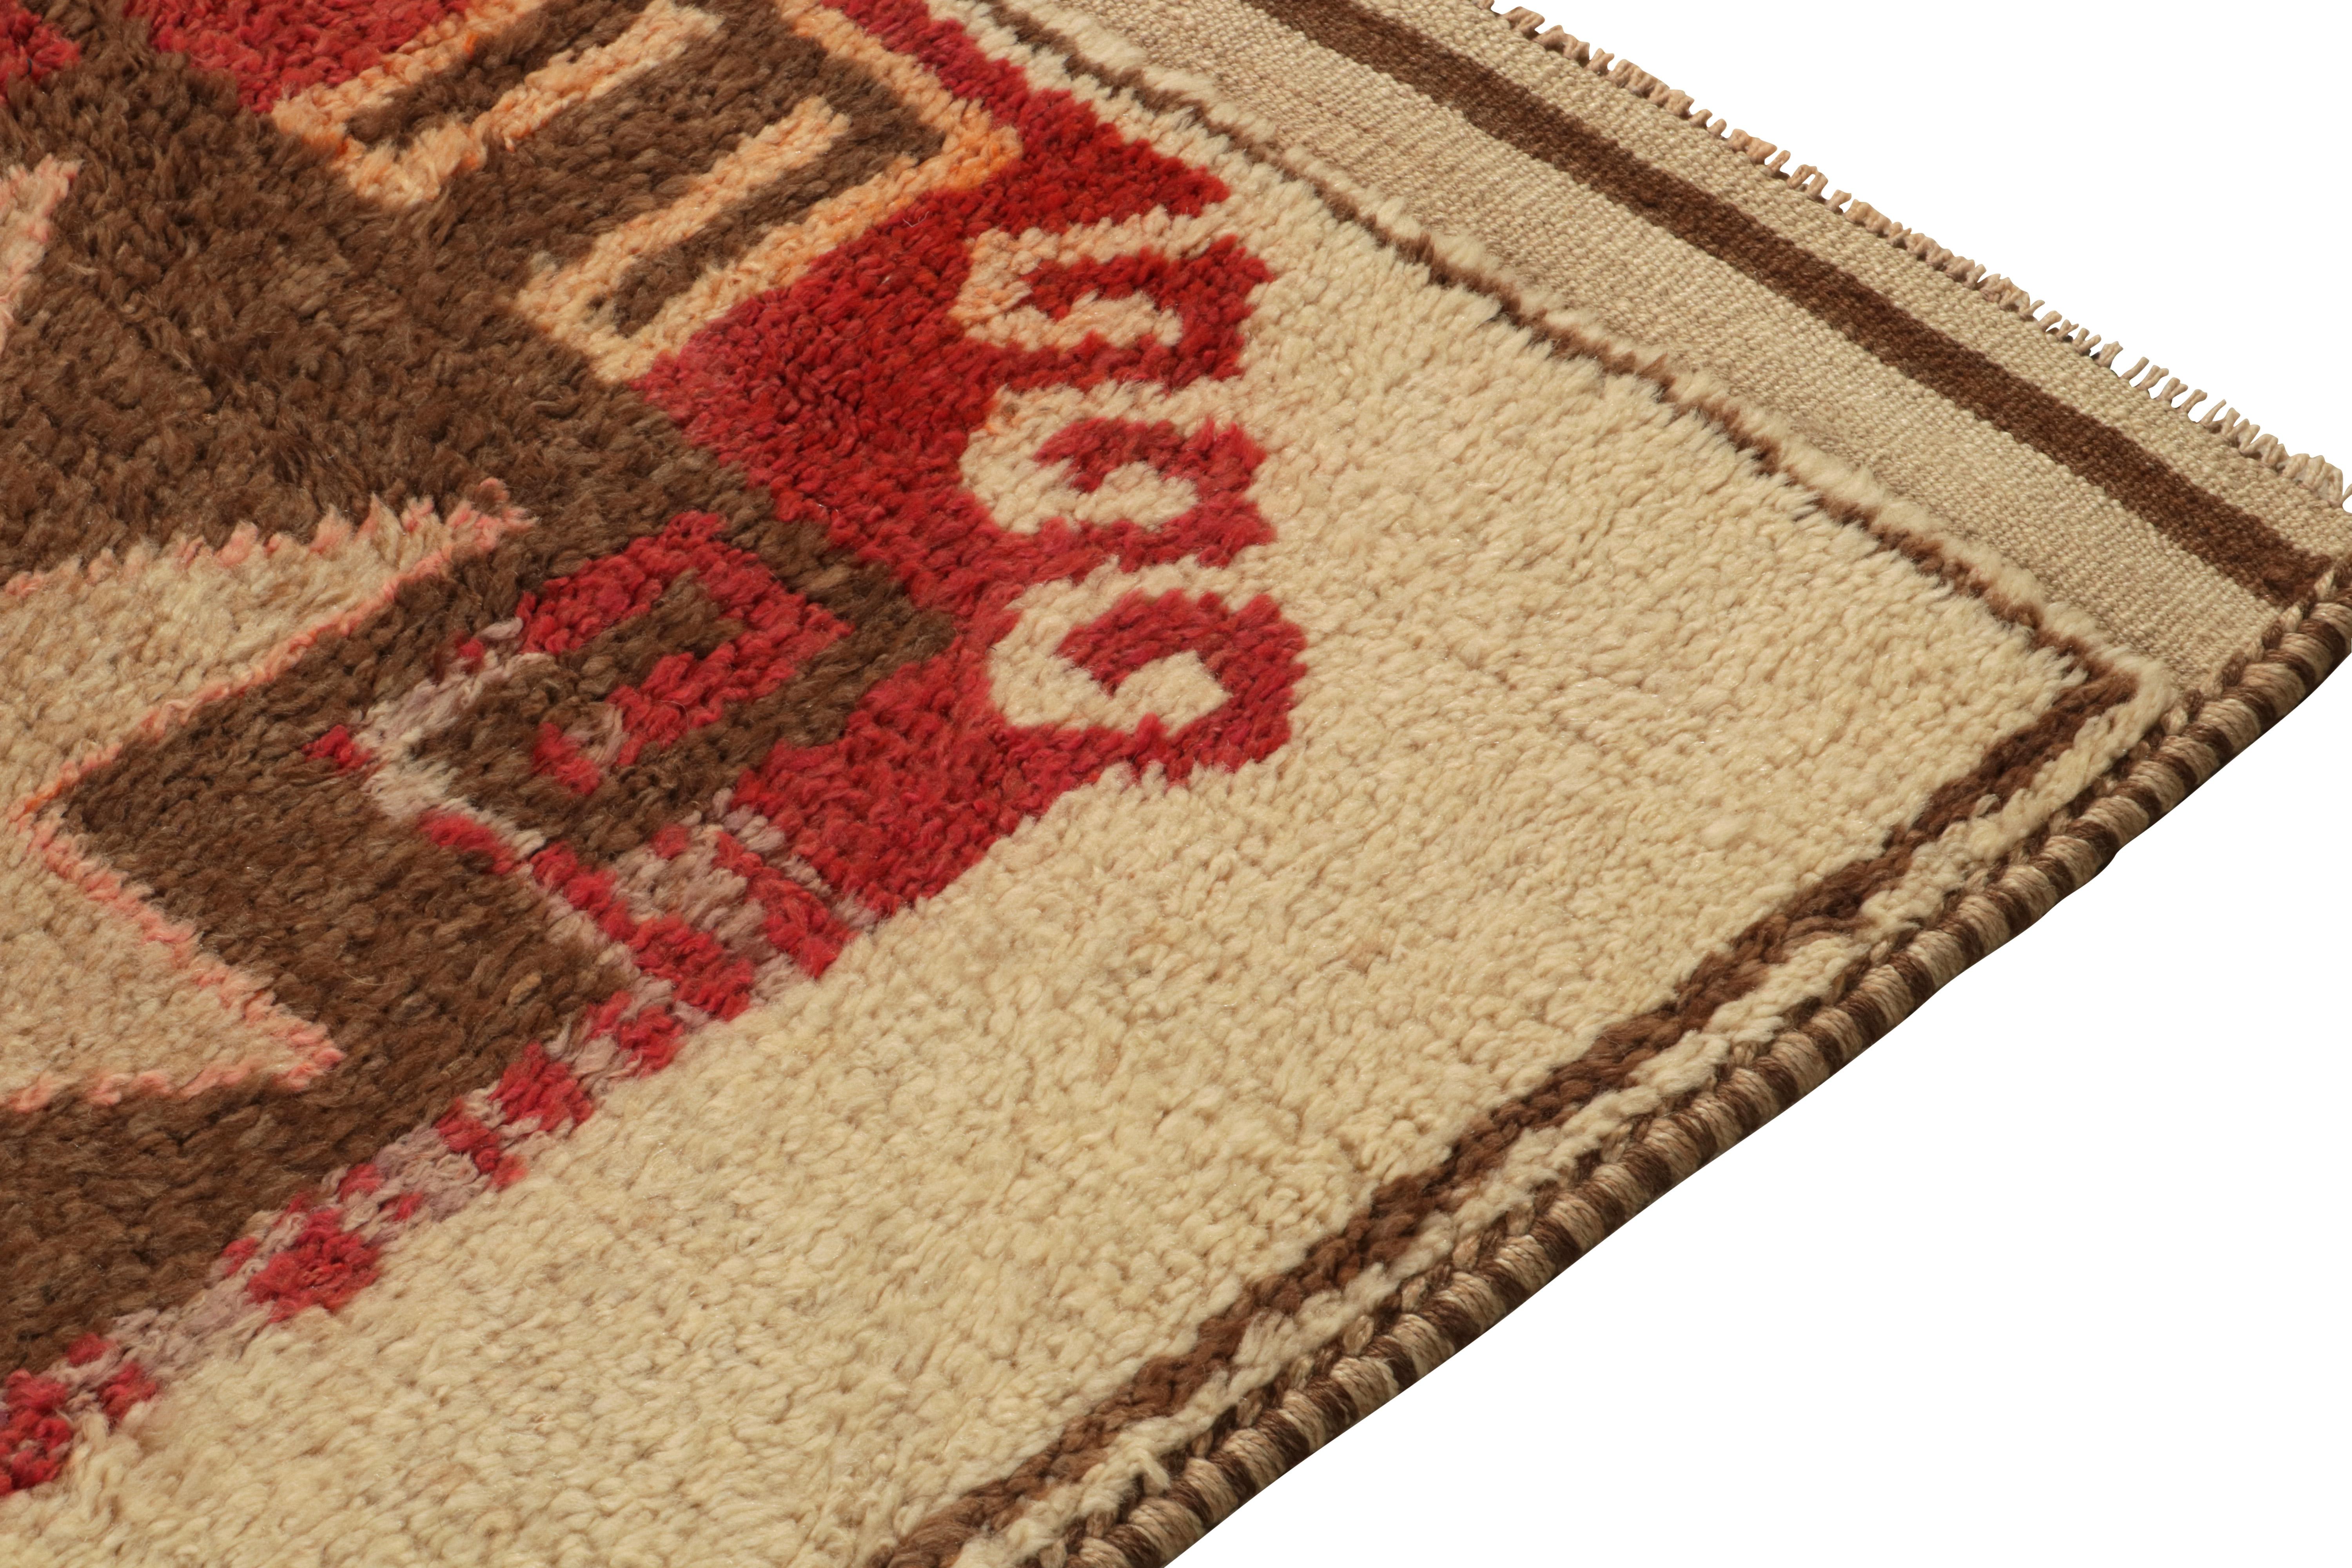 Vintage Tribal Runner in Beige-Brown, Red Medallion Patterns by Rug & Kilim In Good Condition For Sale In Long Island City, NY